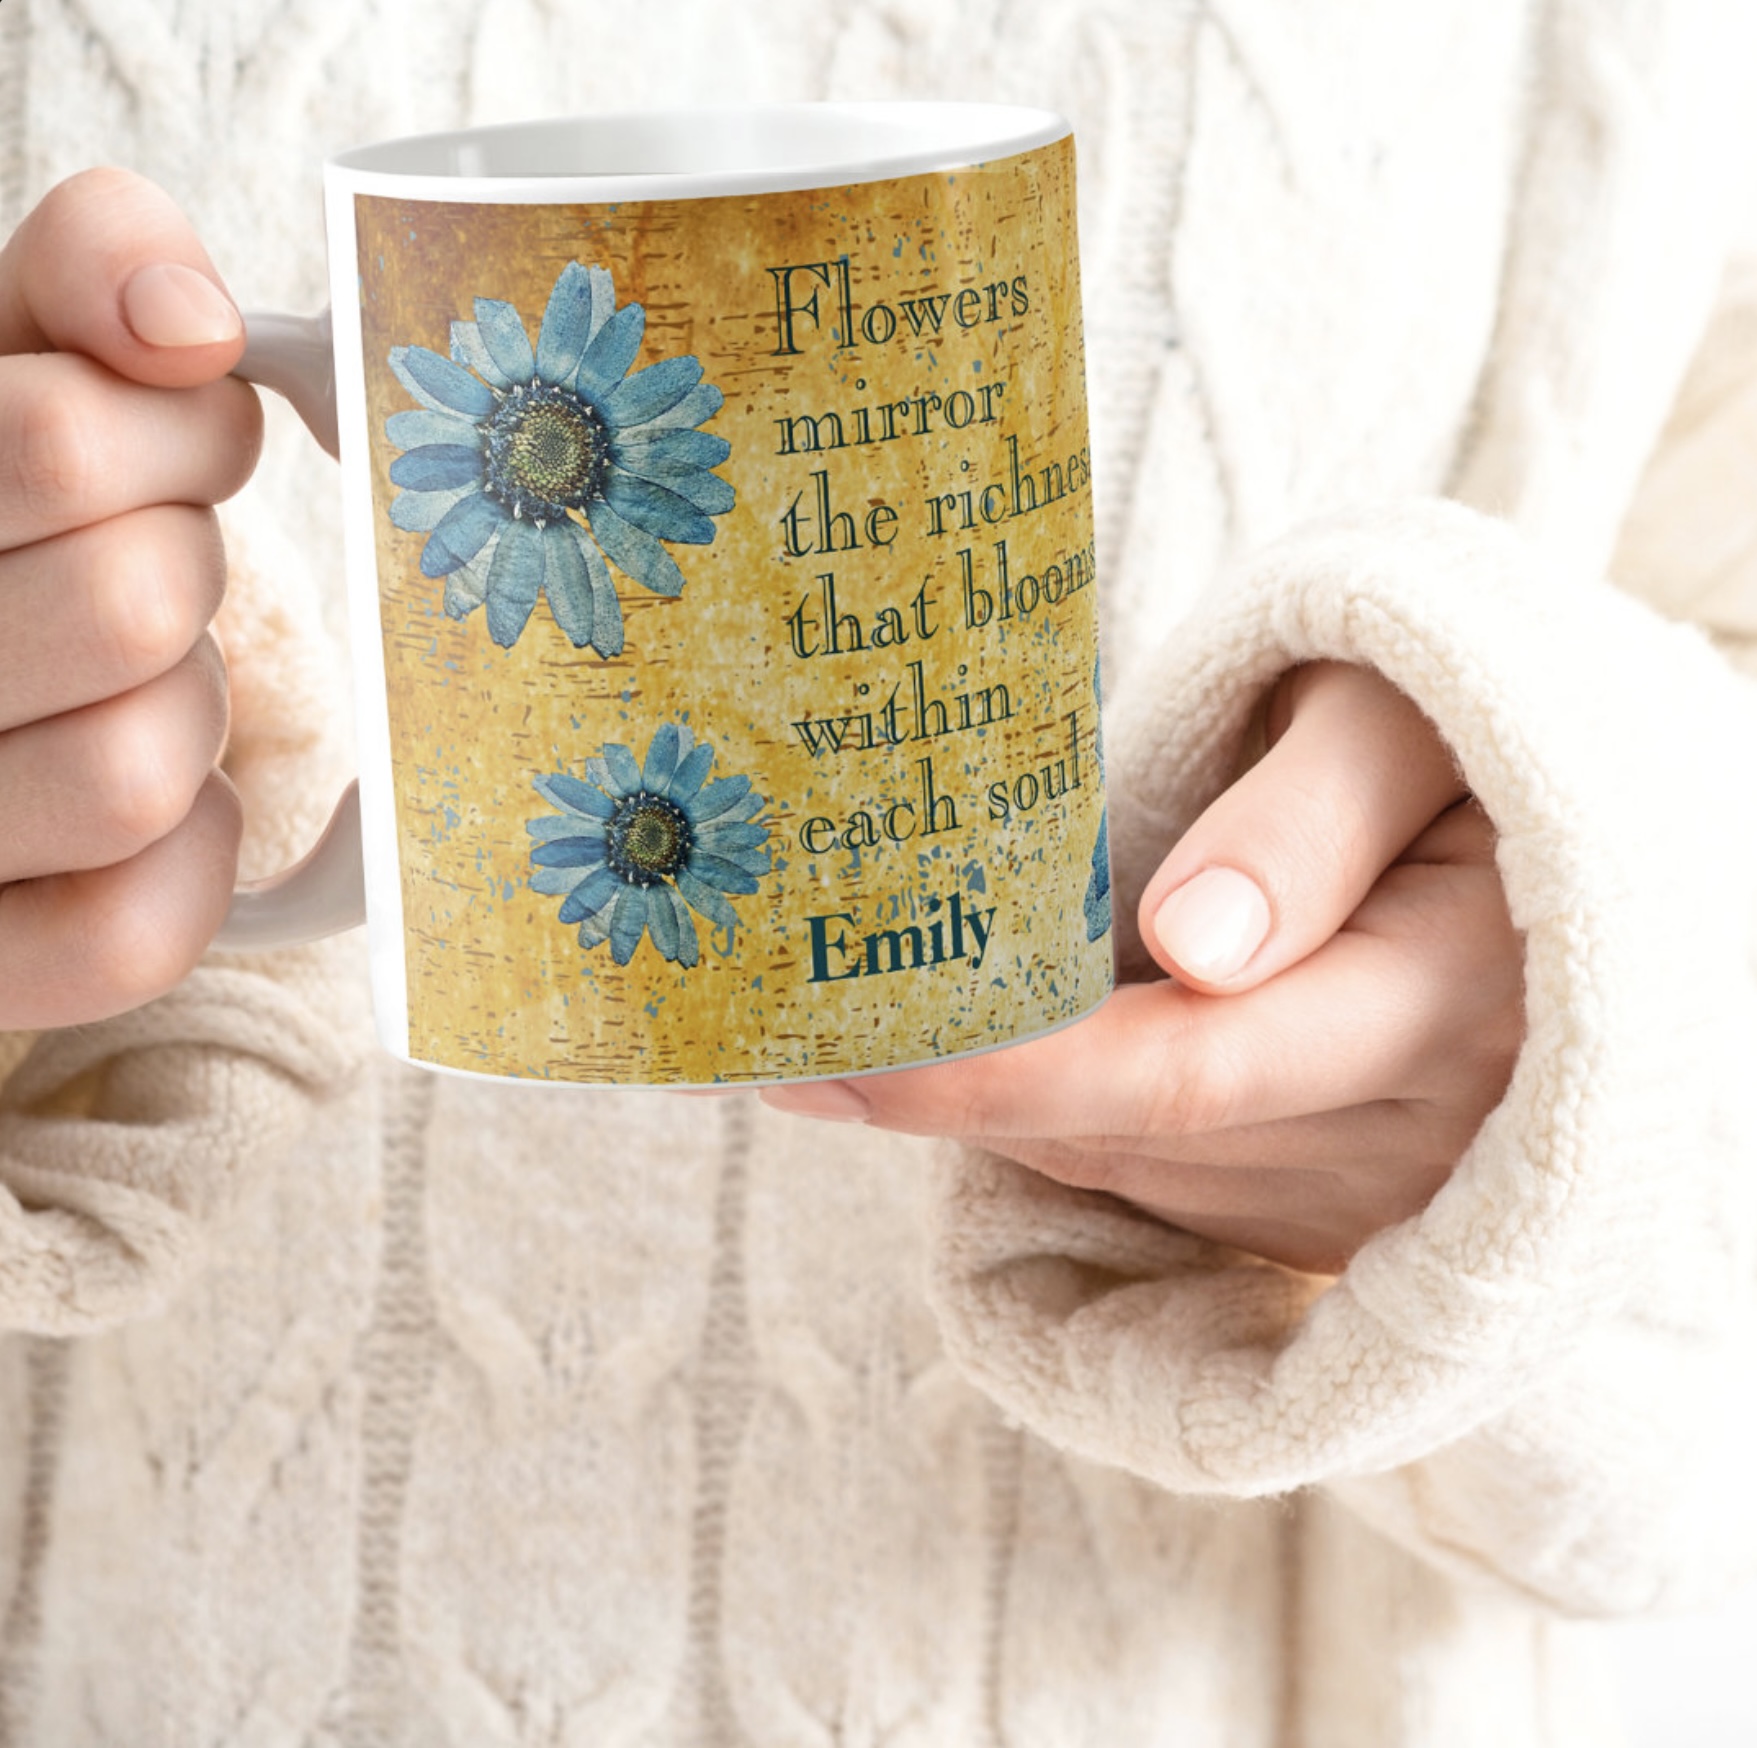 Hands holding a coffee mug with blue gerberas design, with inspirational quote and a orange washed out background.